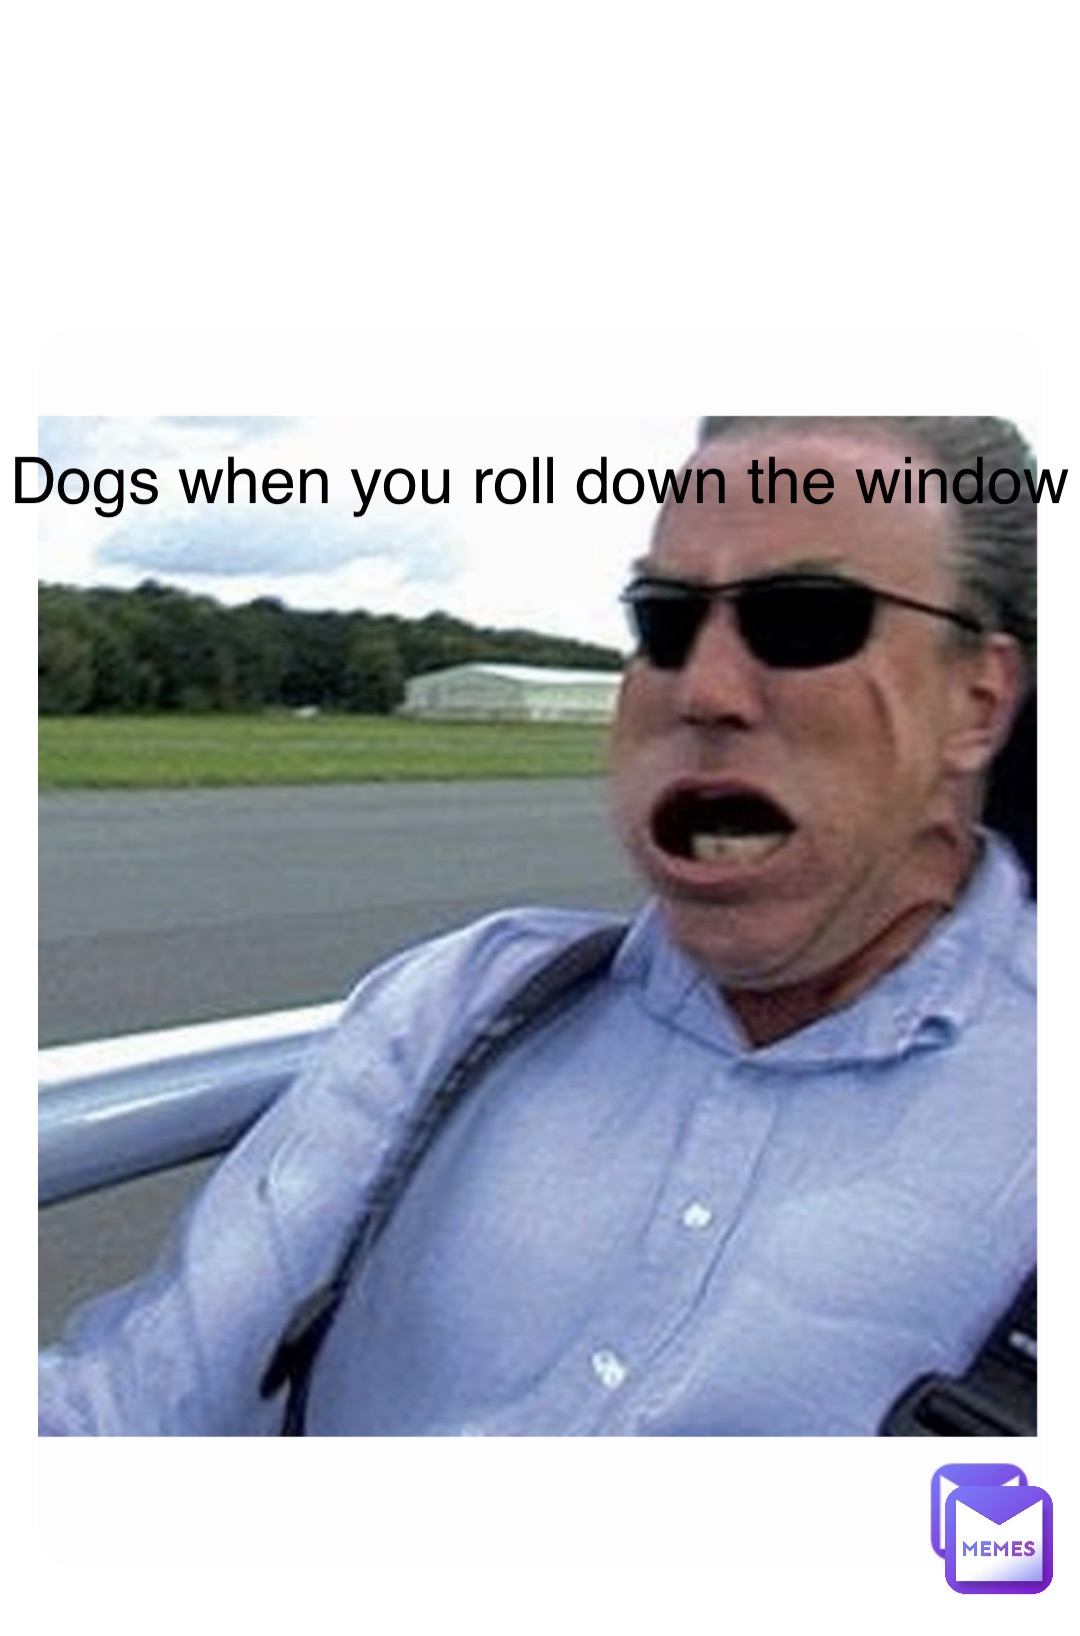 Double tap to edit Dogs when you roll down the window